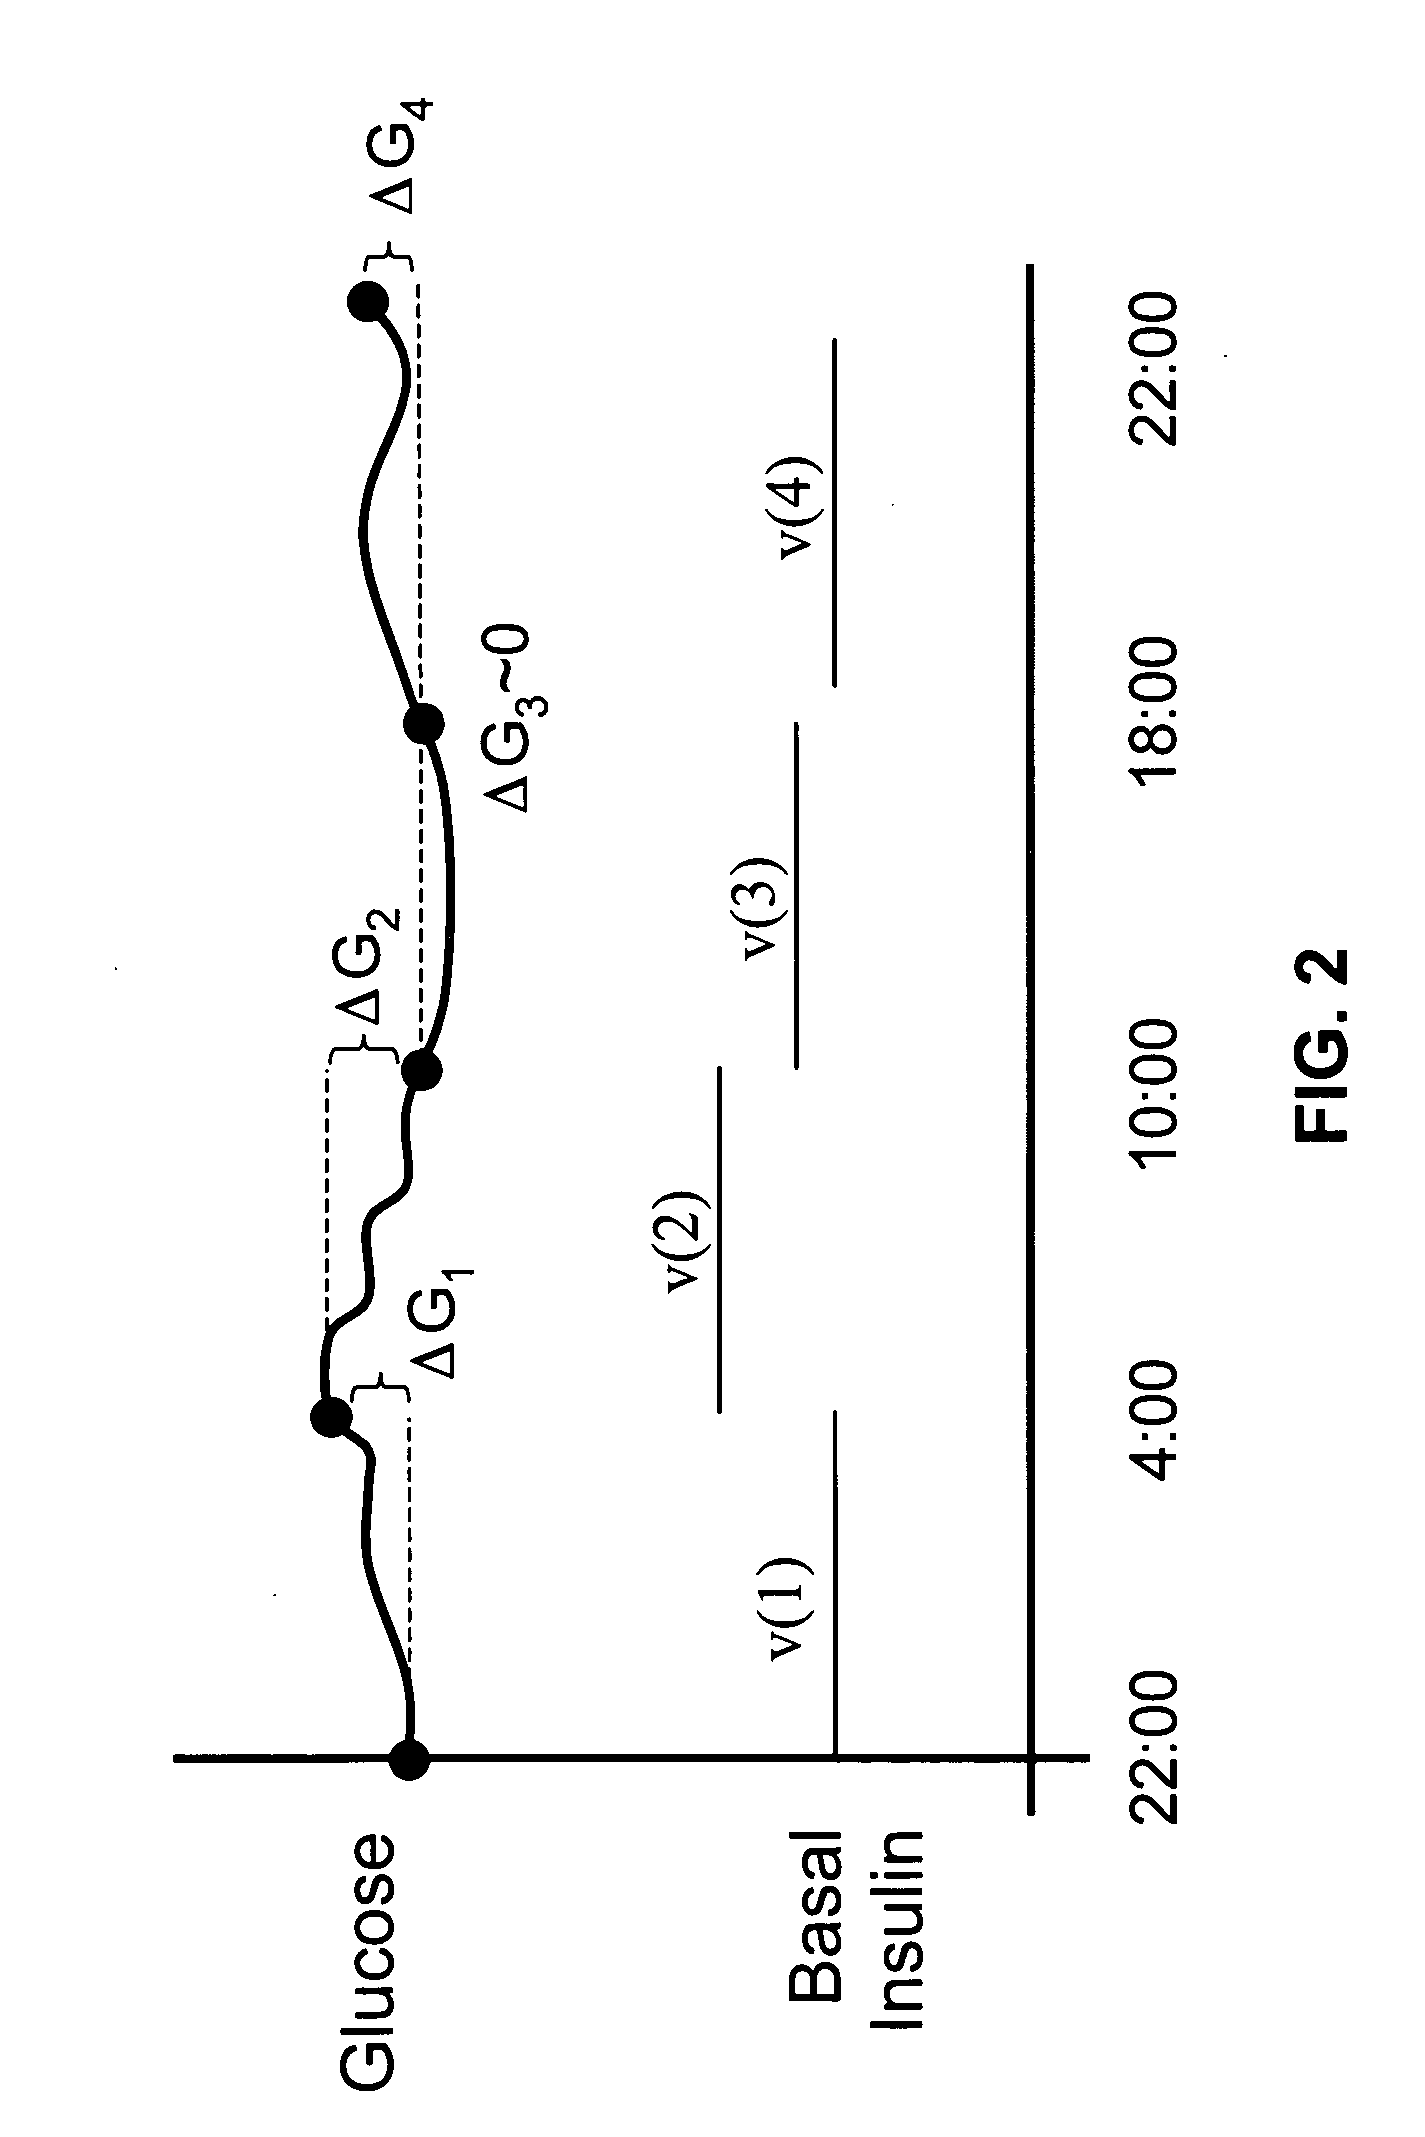 Method and apparatus for glucose control and insulin dosing for diabetics